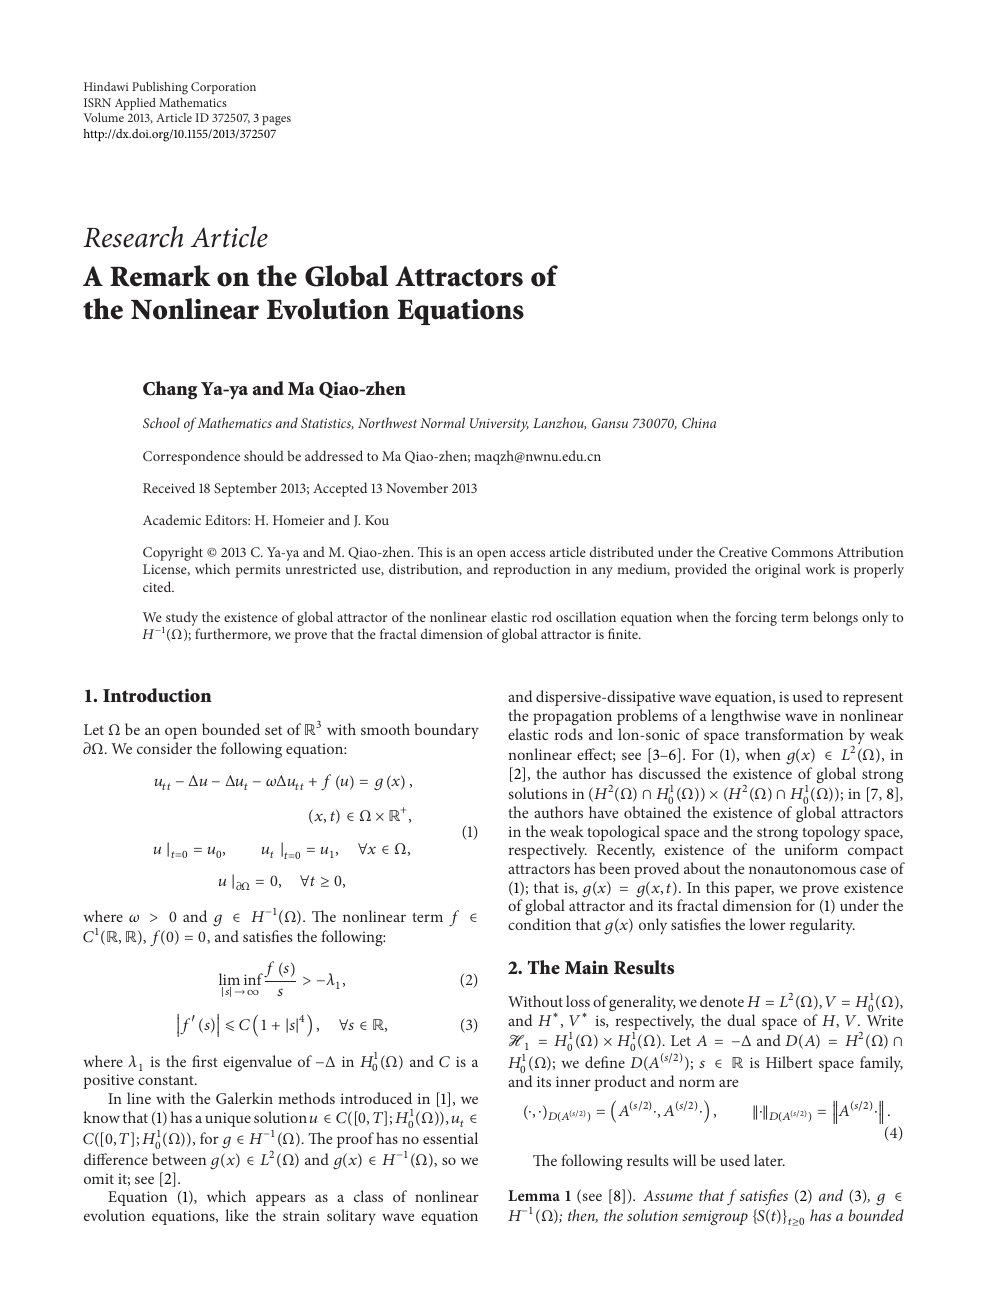 A Remark On The Global Attractors Of The Nonlinear Evolution Equations Topic Of Research Paper In Mathematics Download Scholarly Article Pdf And Read For Free On Cyberleninka Open Science Hub